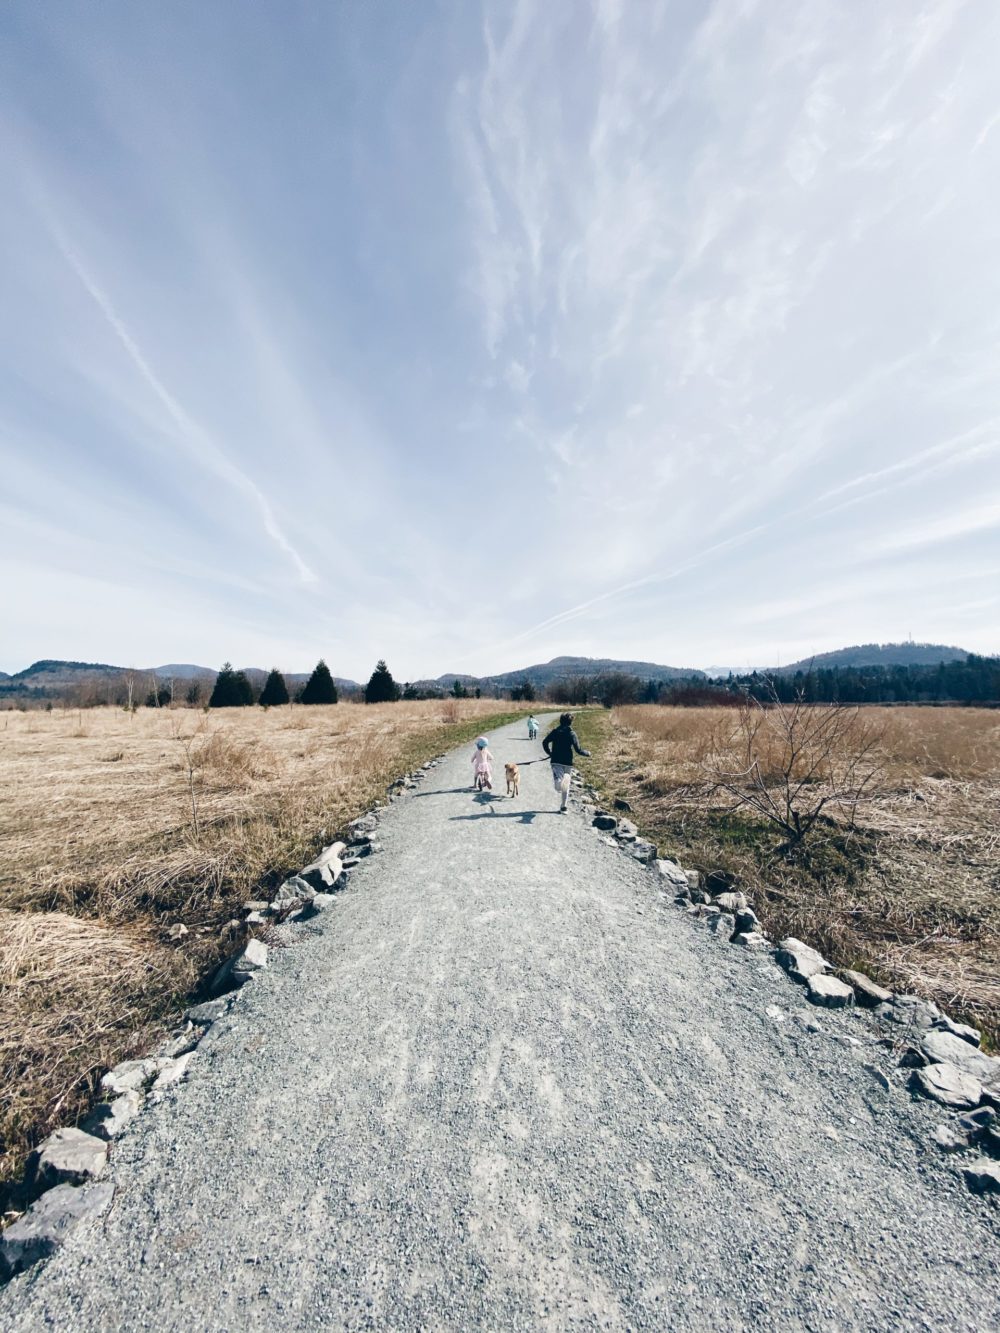 Willband Park | List of walks and hikes for kids in abbotsford and the fraser valley